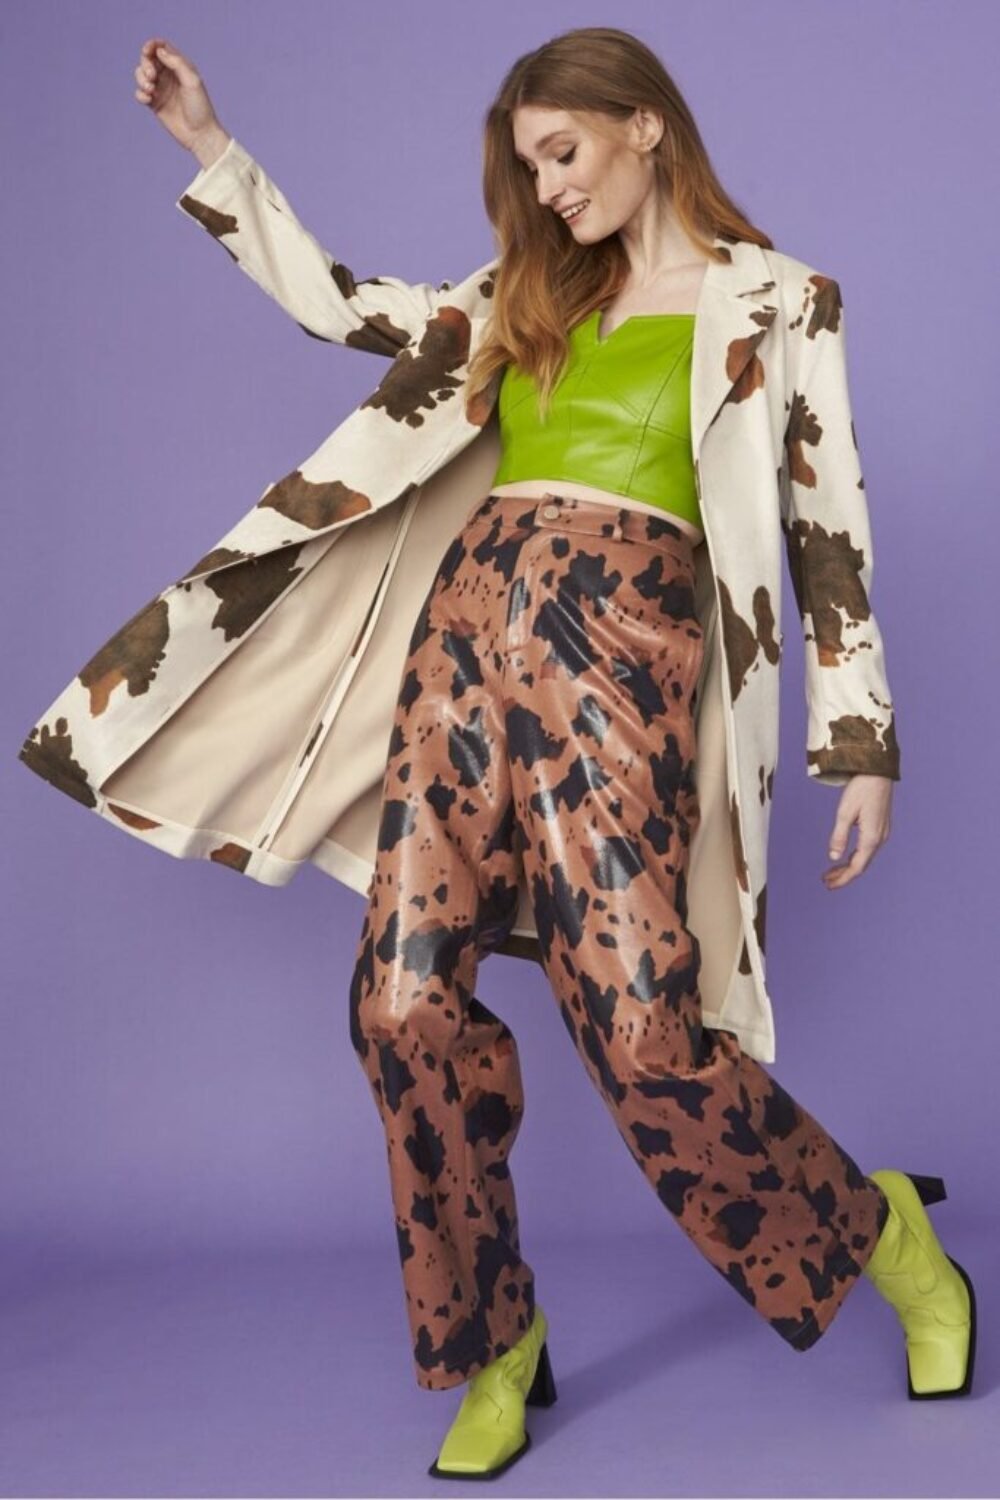 Shop Lux Cow Print Faux Suede Animal Print Trousers and women's luxury and designer clothes at www.lux-apparel.co.uk